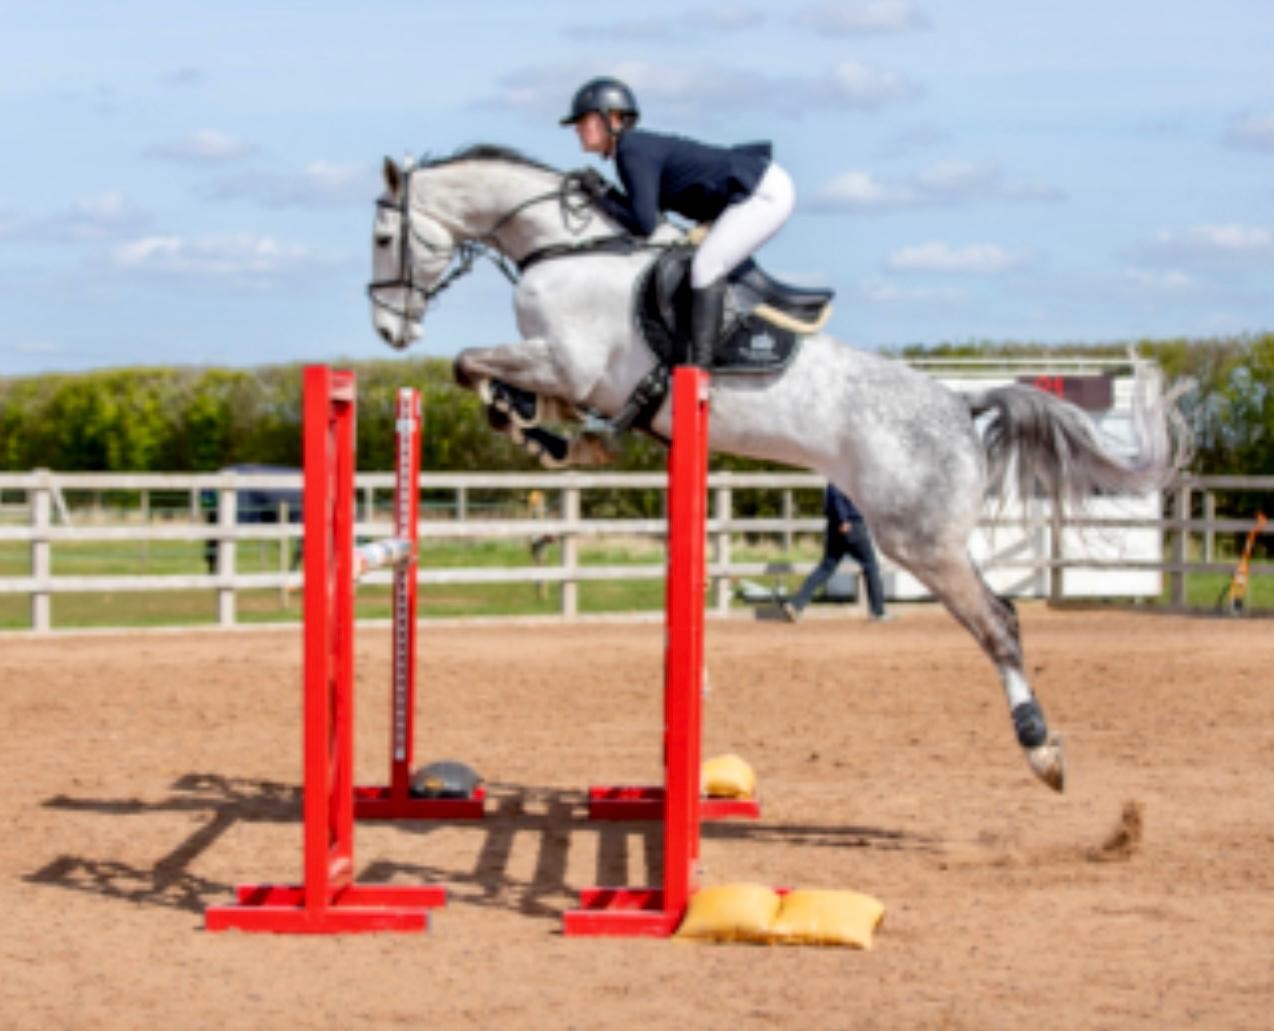 SUPER RESULTS FOR FIRS AND FEATHERS HORSES UNDER DAISY WILLIAMS